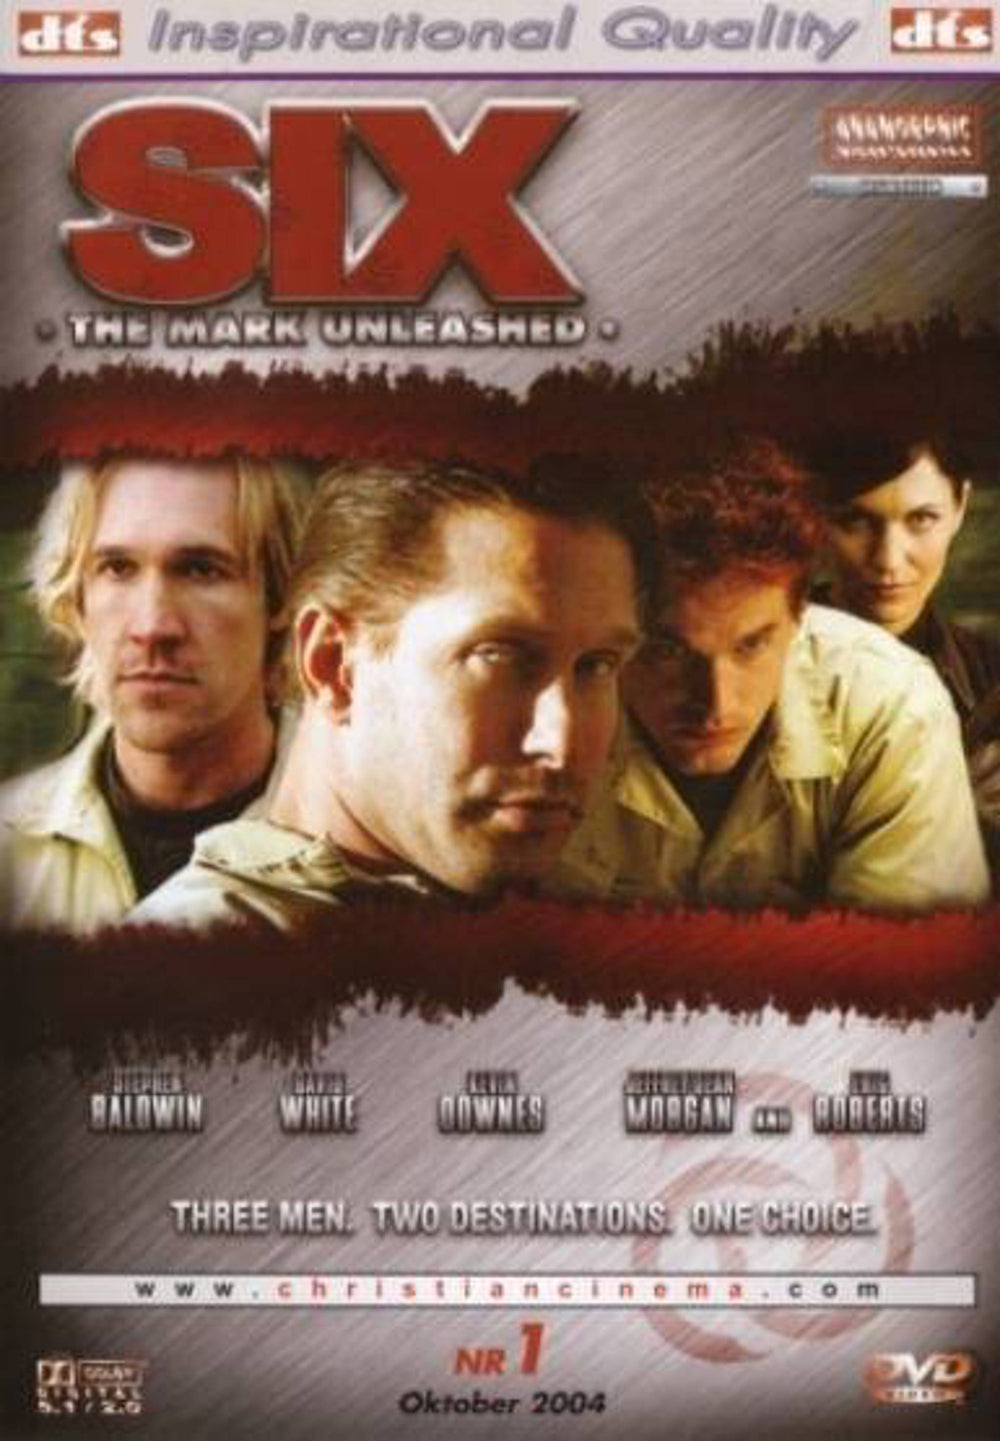 Six-the mark unleashed (DVD)